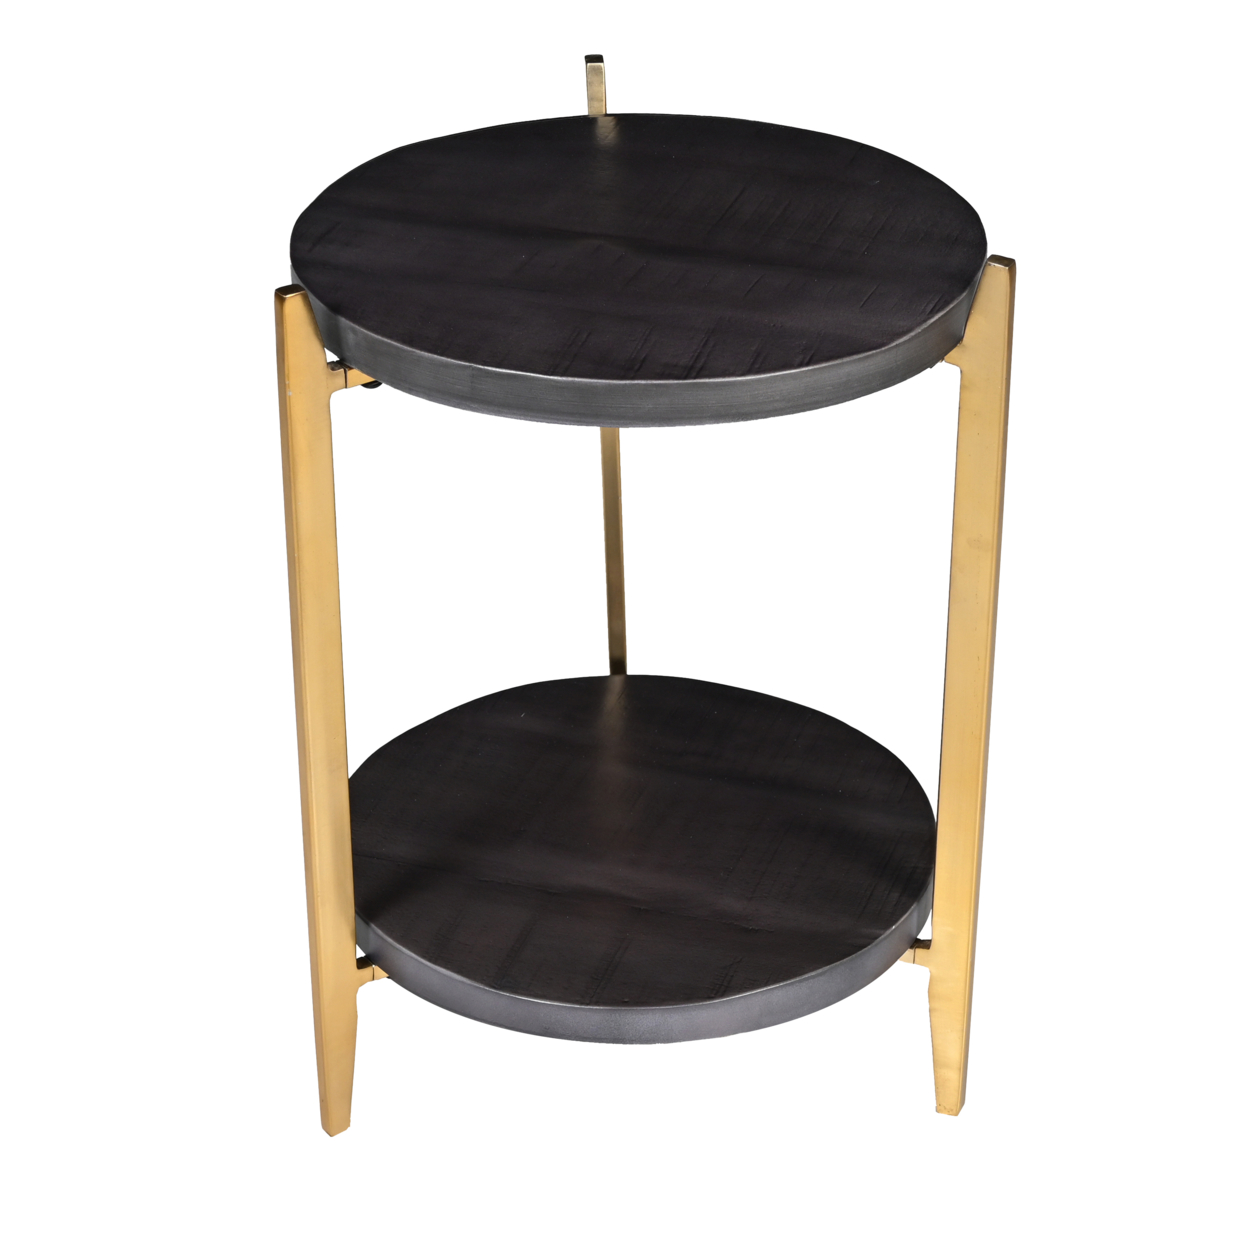 Tali 16 Inch Handcrafted Round Side End Table, 2 Tier, Charcoal Gray Acacia Wood, Sleek Gold Metal Legs- Saltoro Sherpi